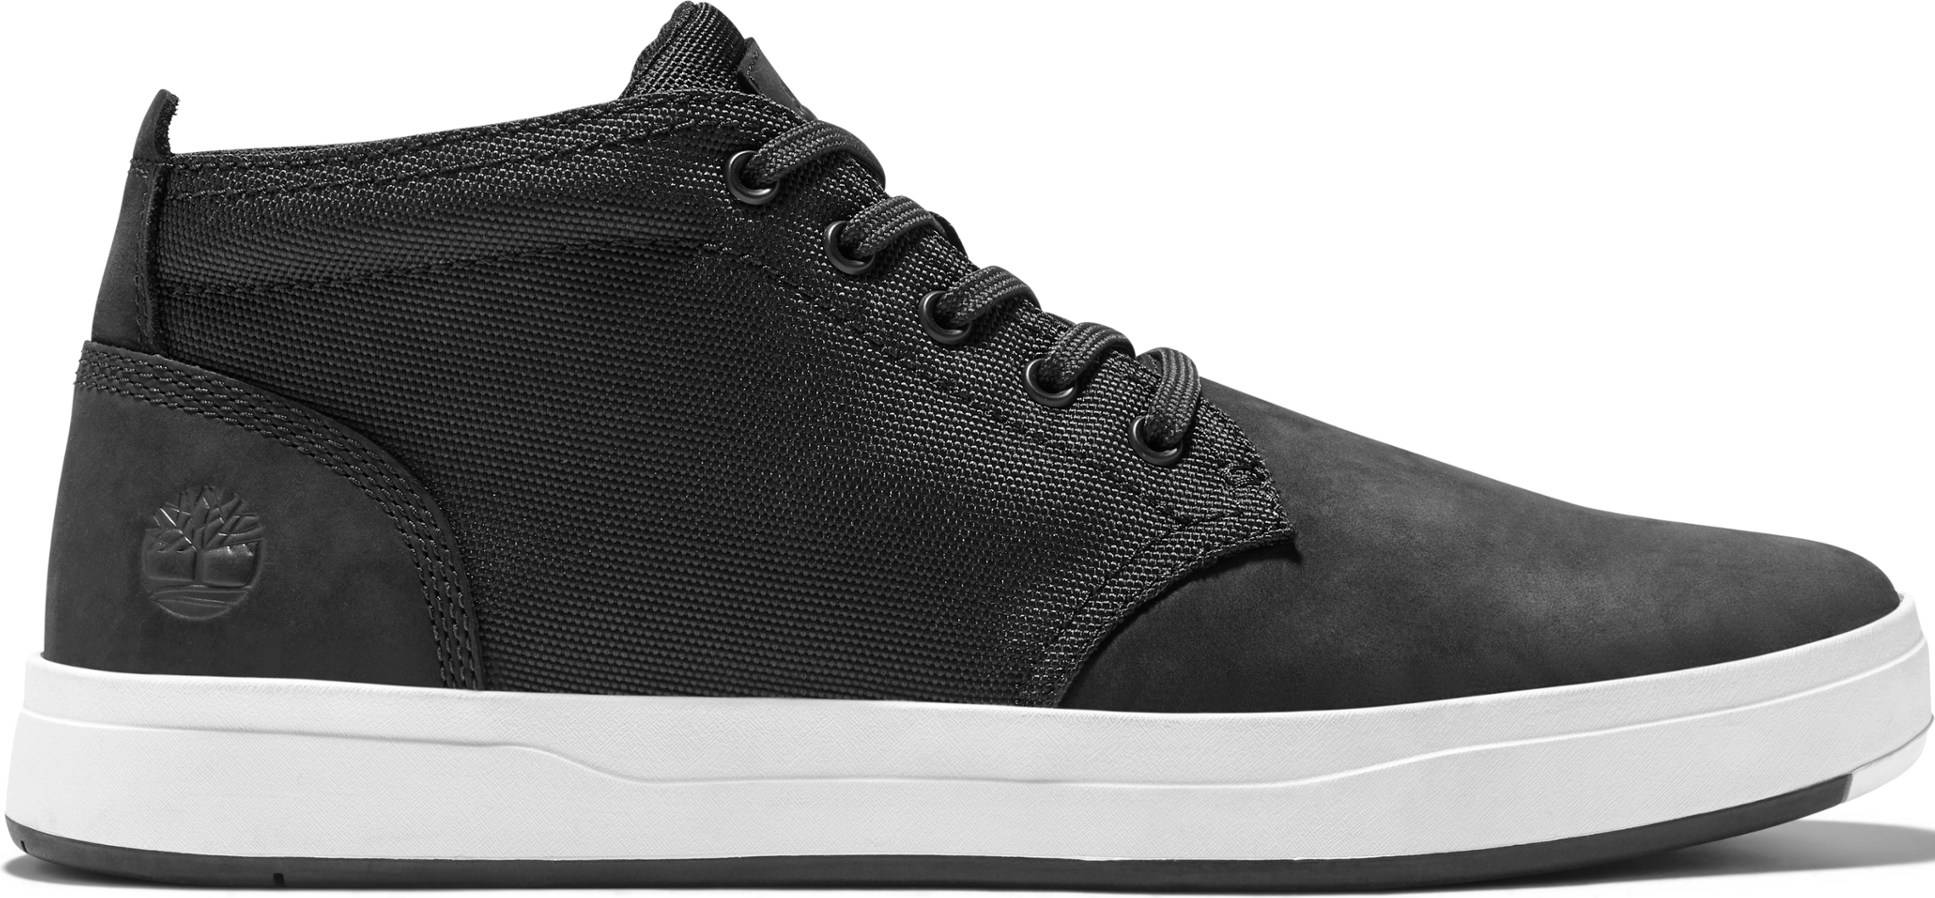 20+ Timberland sneakers: Save up to 51% | RunRepeat